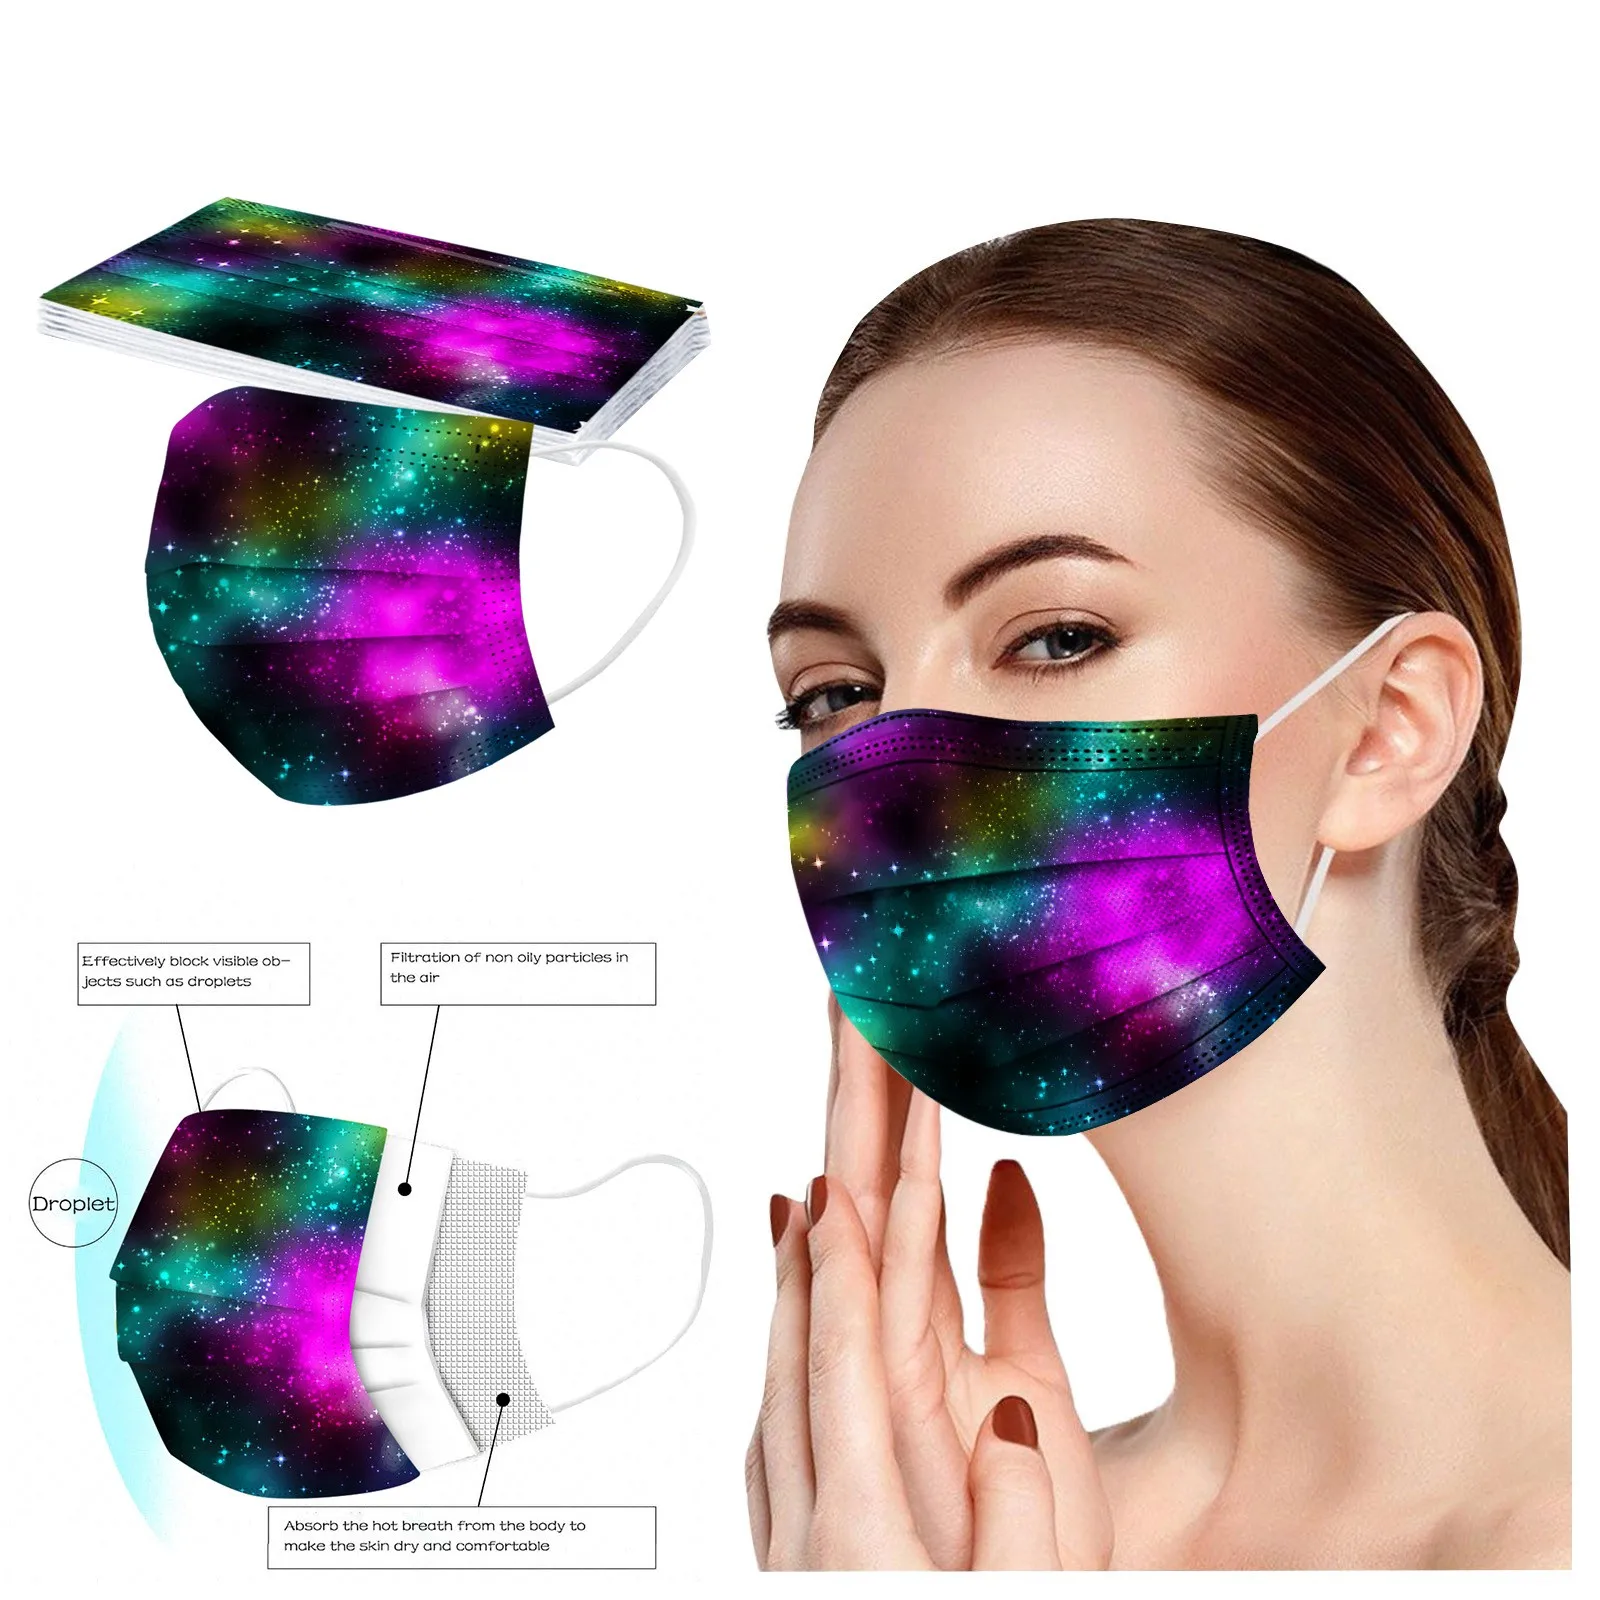 50Pcs Adult Disposable Anti-pollution Cloth Mask Star Printed 3ply Print Mascarillas Halloween Cosplay Masque Cartoon Face masks simple halloween costumes